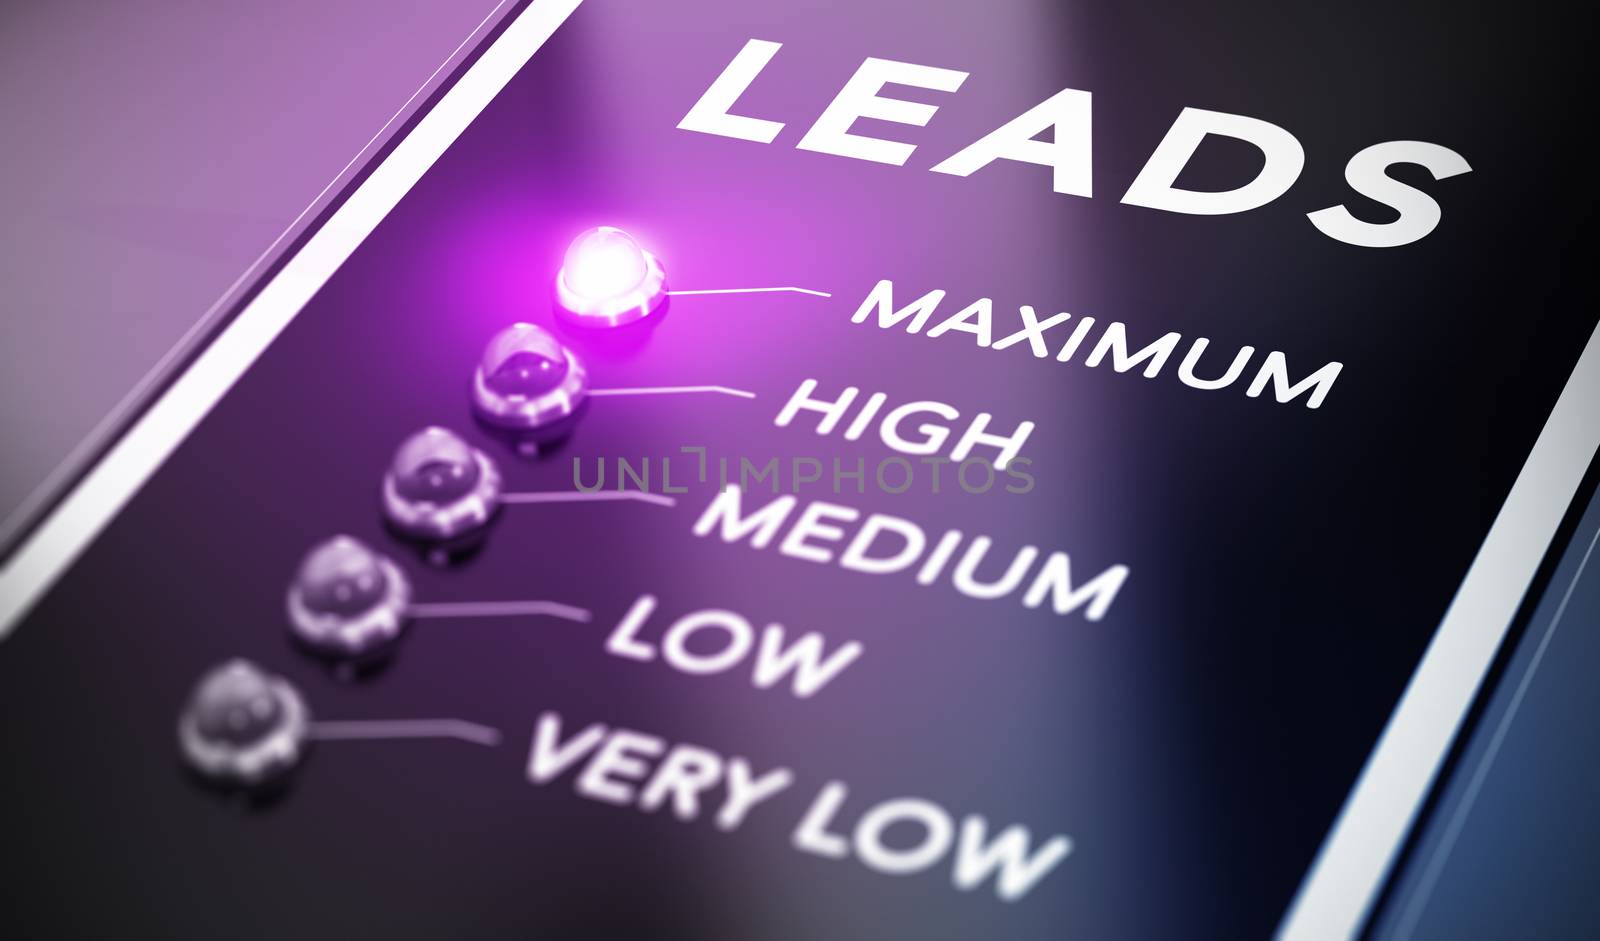 Lead generation concept, Illustration of internet marketing over black background with purple light and blur effect.